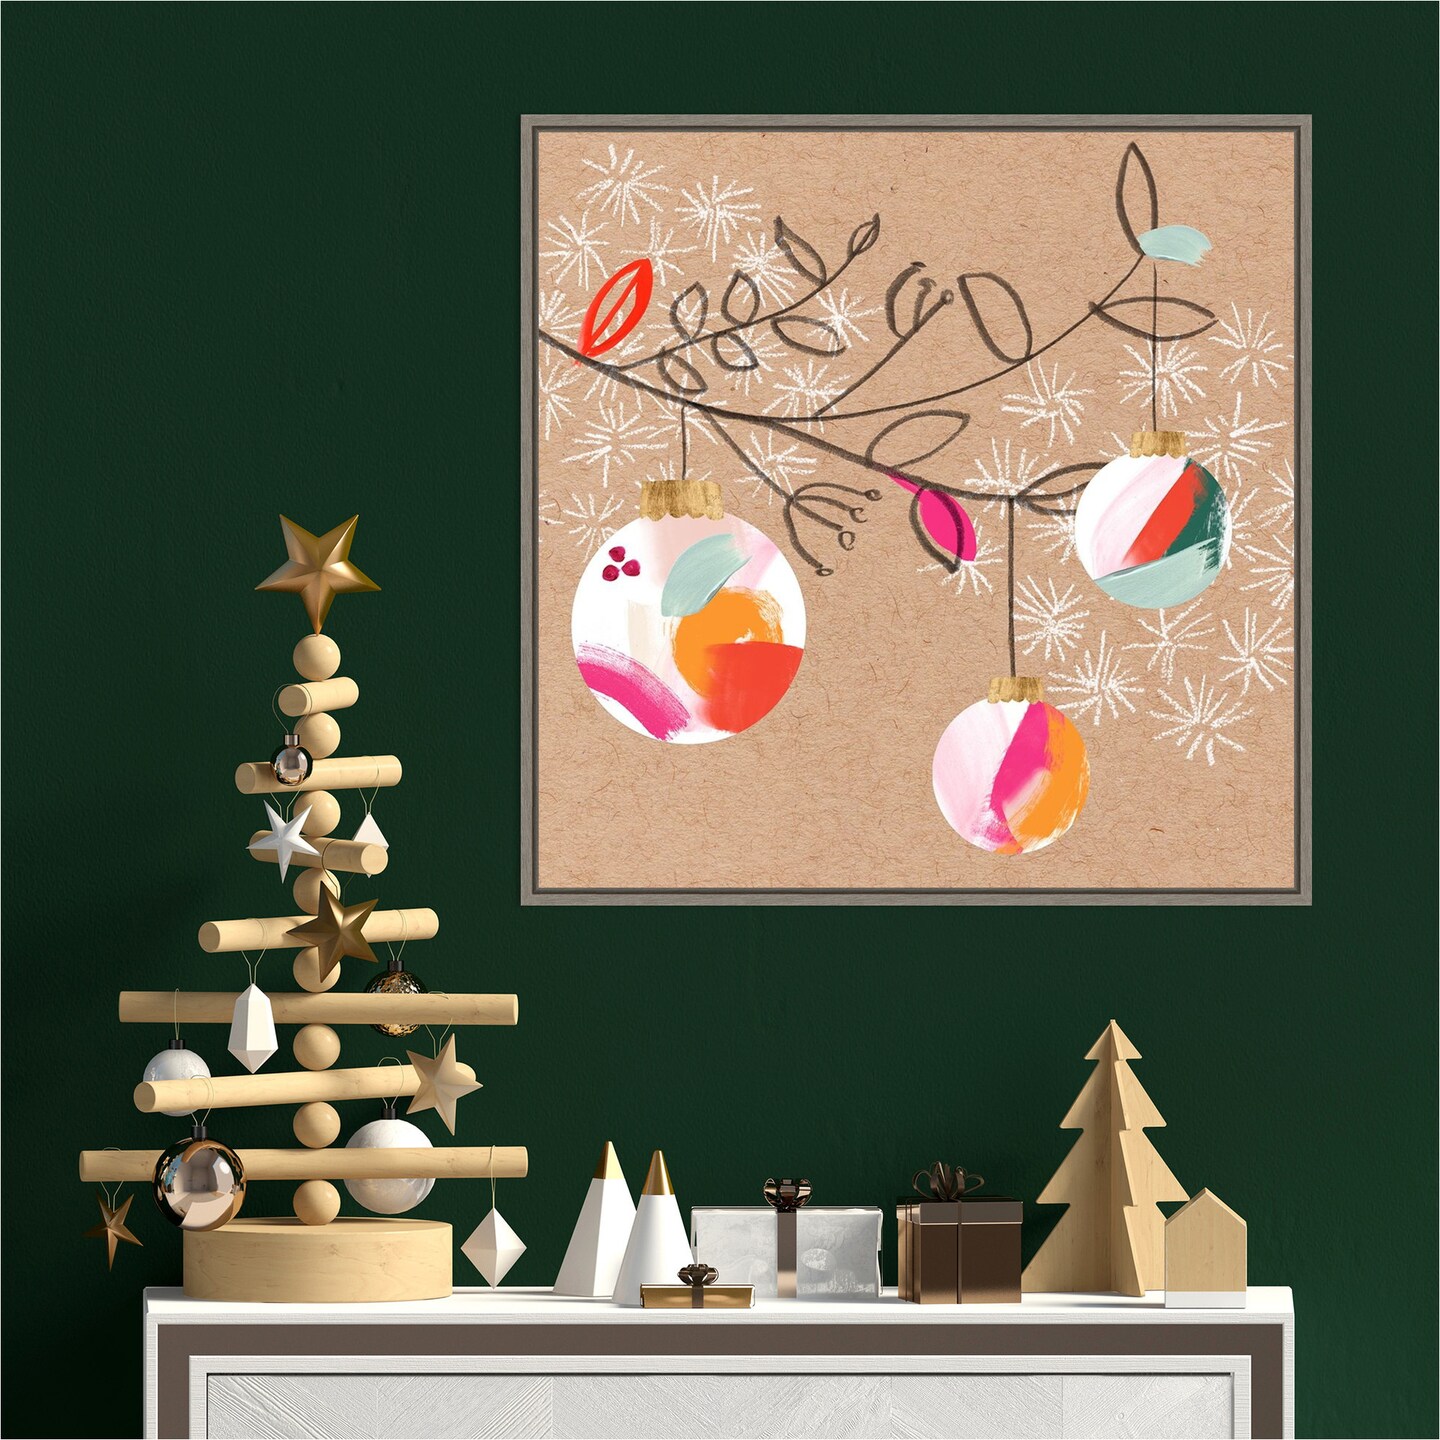 Crafty Christmas III by Jennifer Paxton Parker 22-in. W x 22-in. H. Canvas Wall Art Print Framed in Grey